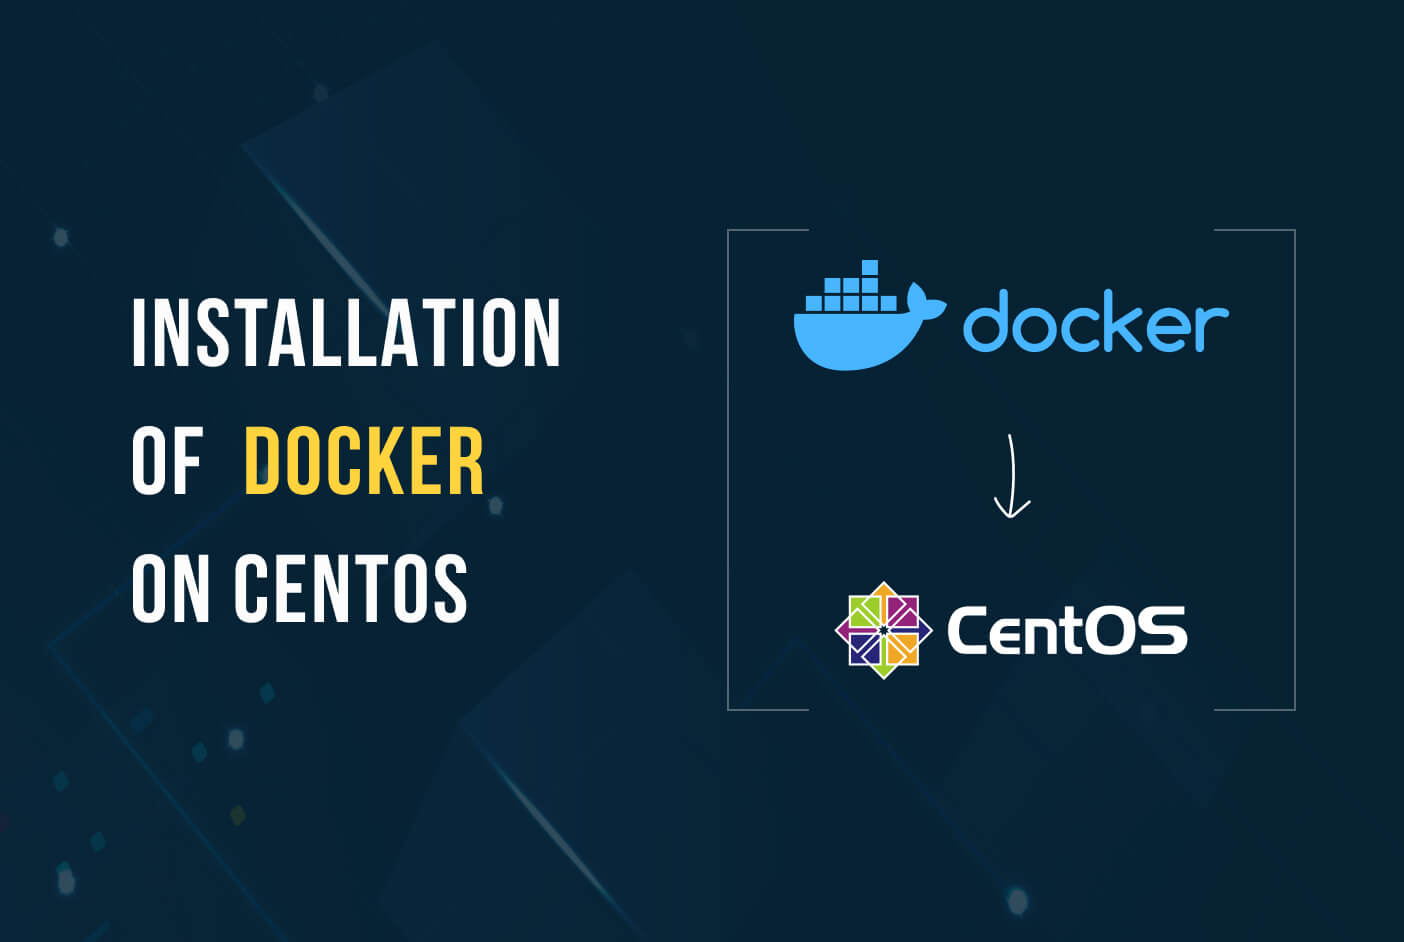 How to install and configure Docker on CentOS 7: